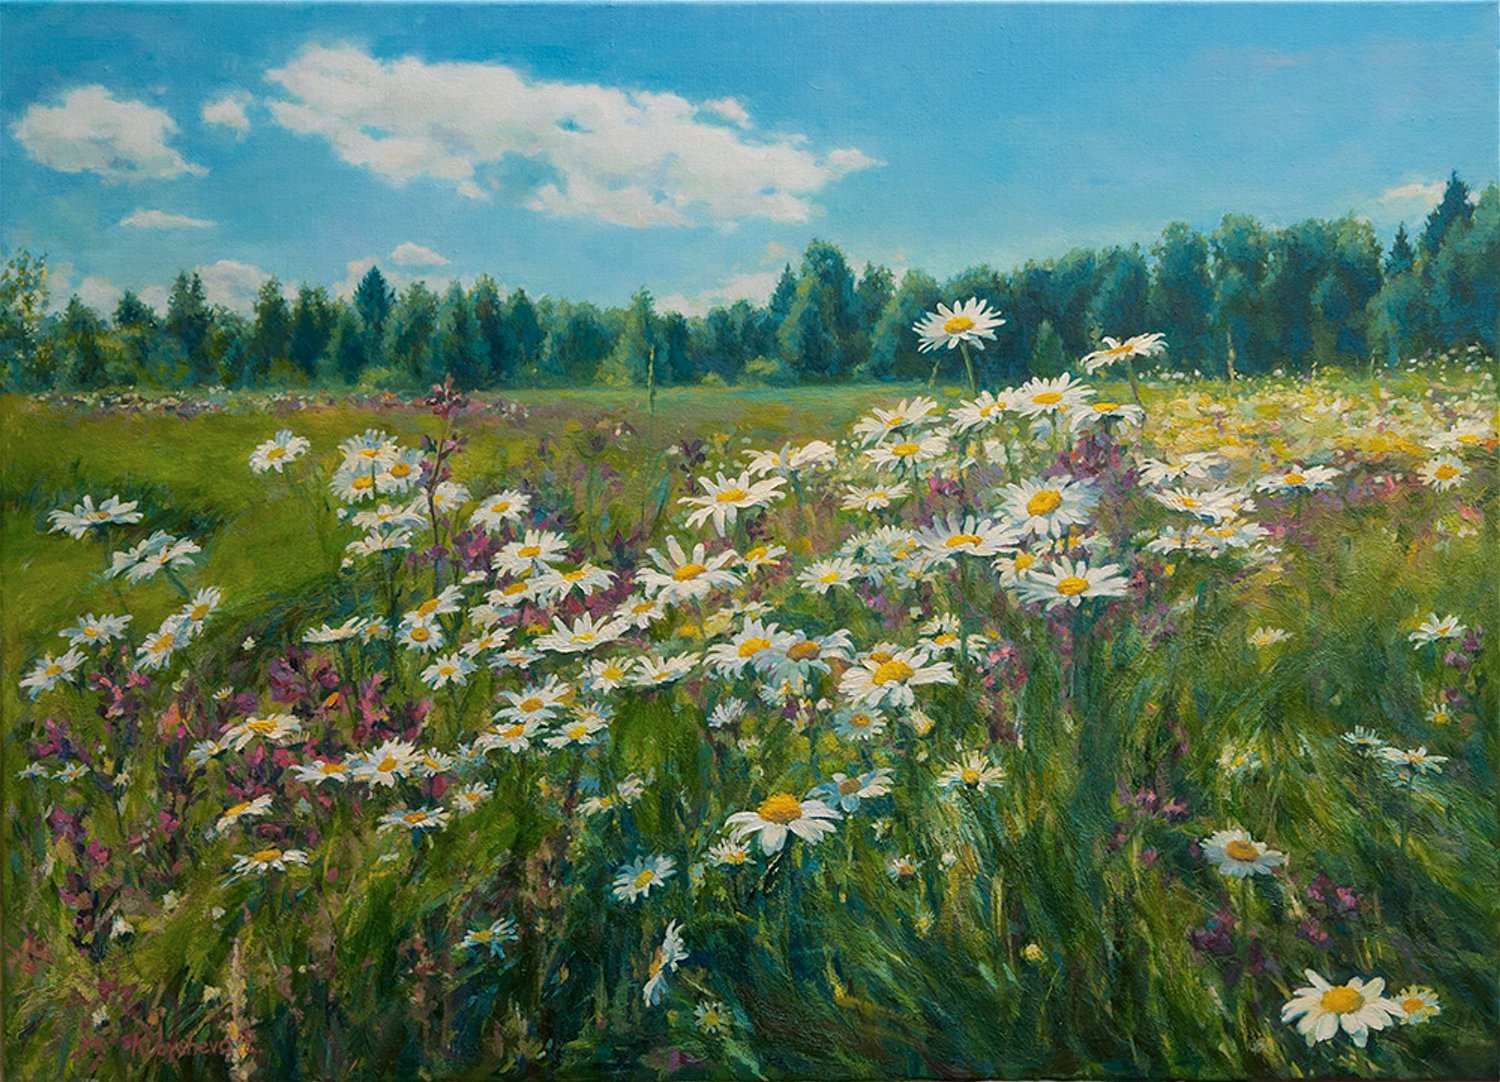 The view field with daisies is really landscape on central Russia. Oil, canvas.